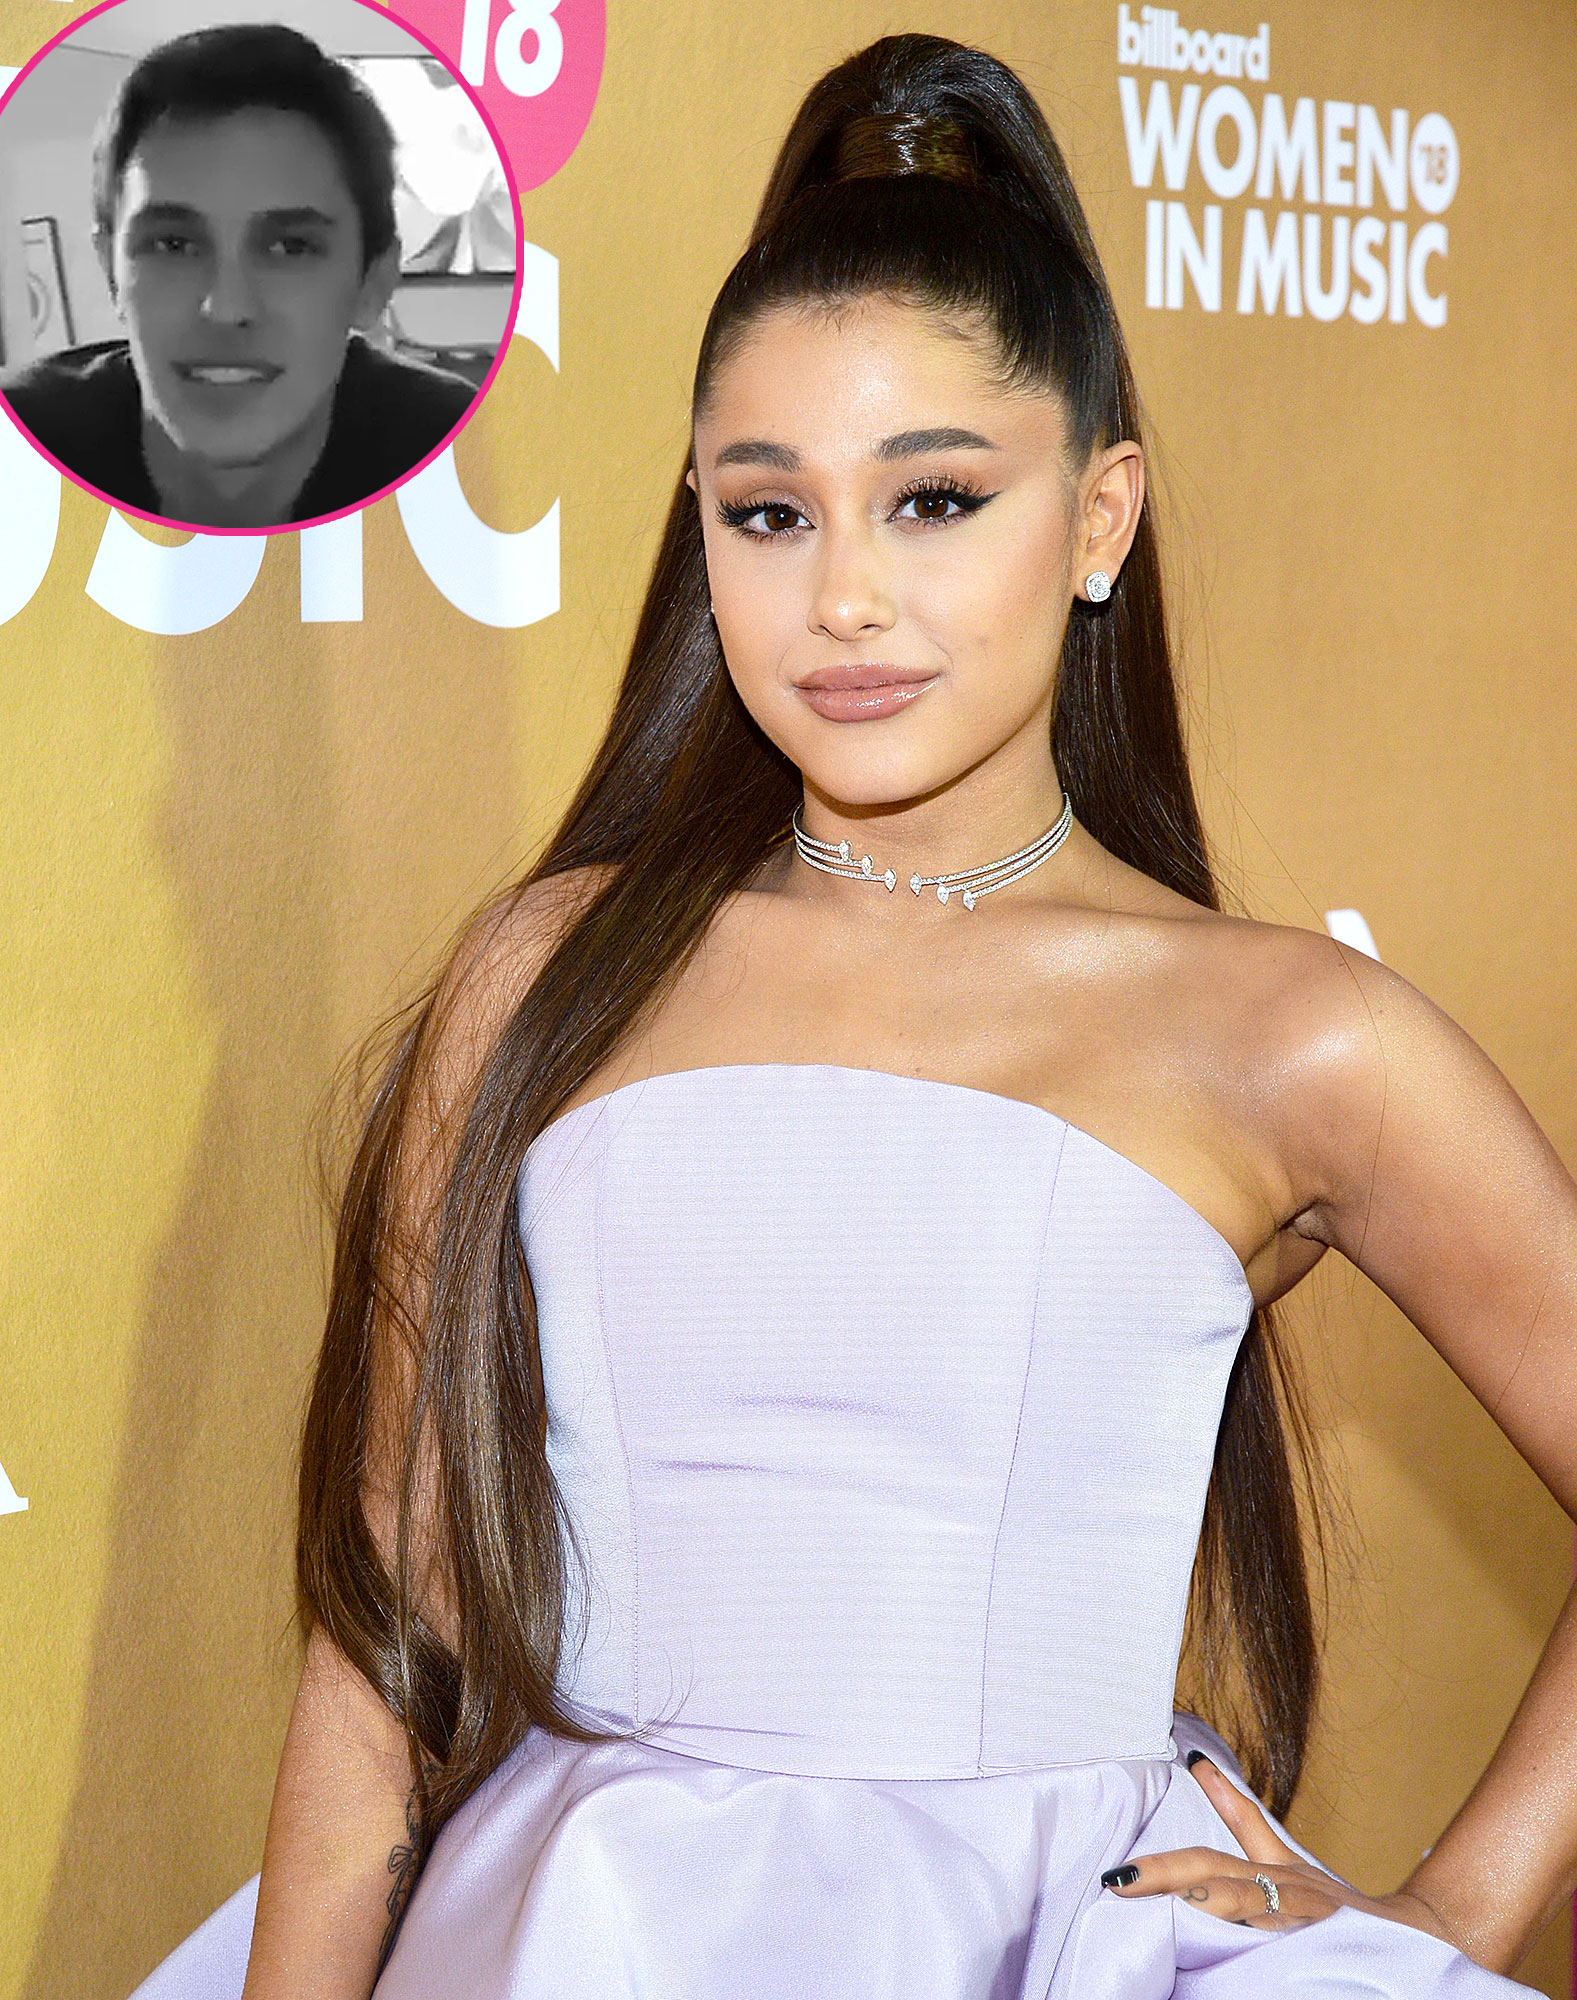 First Spotted February 2020 Ariana Grande and Dalton Gomez Relationship Timeline